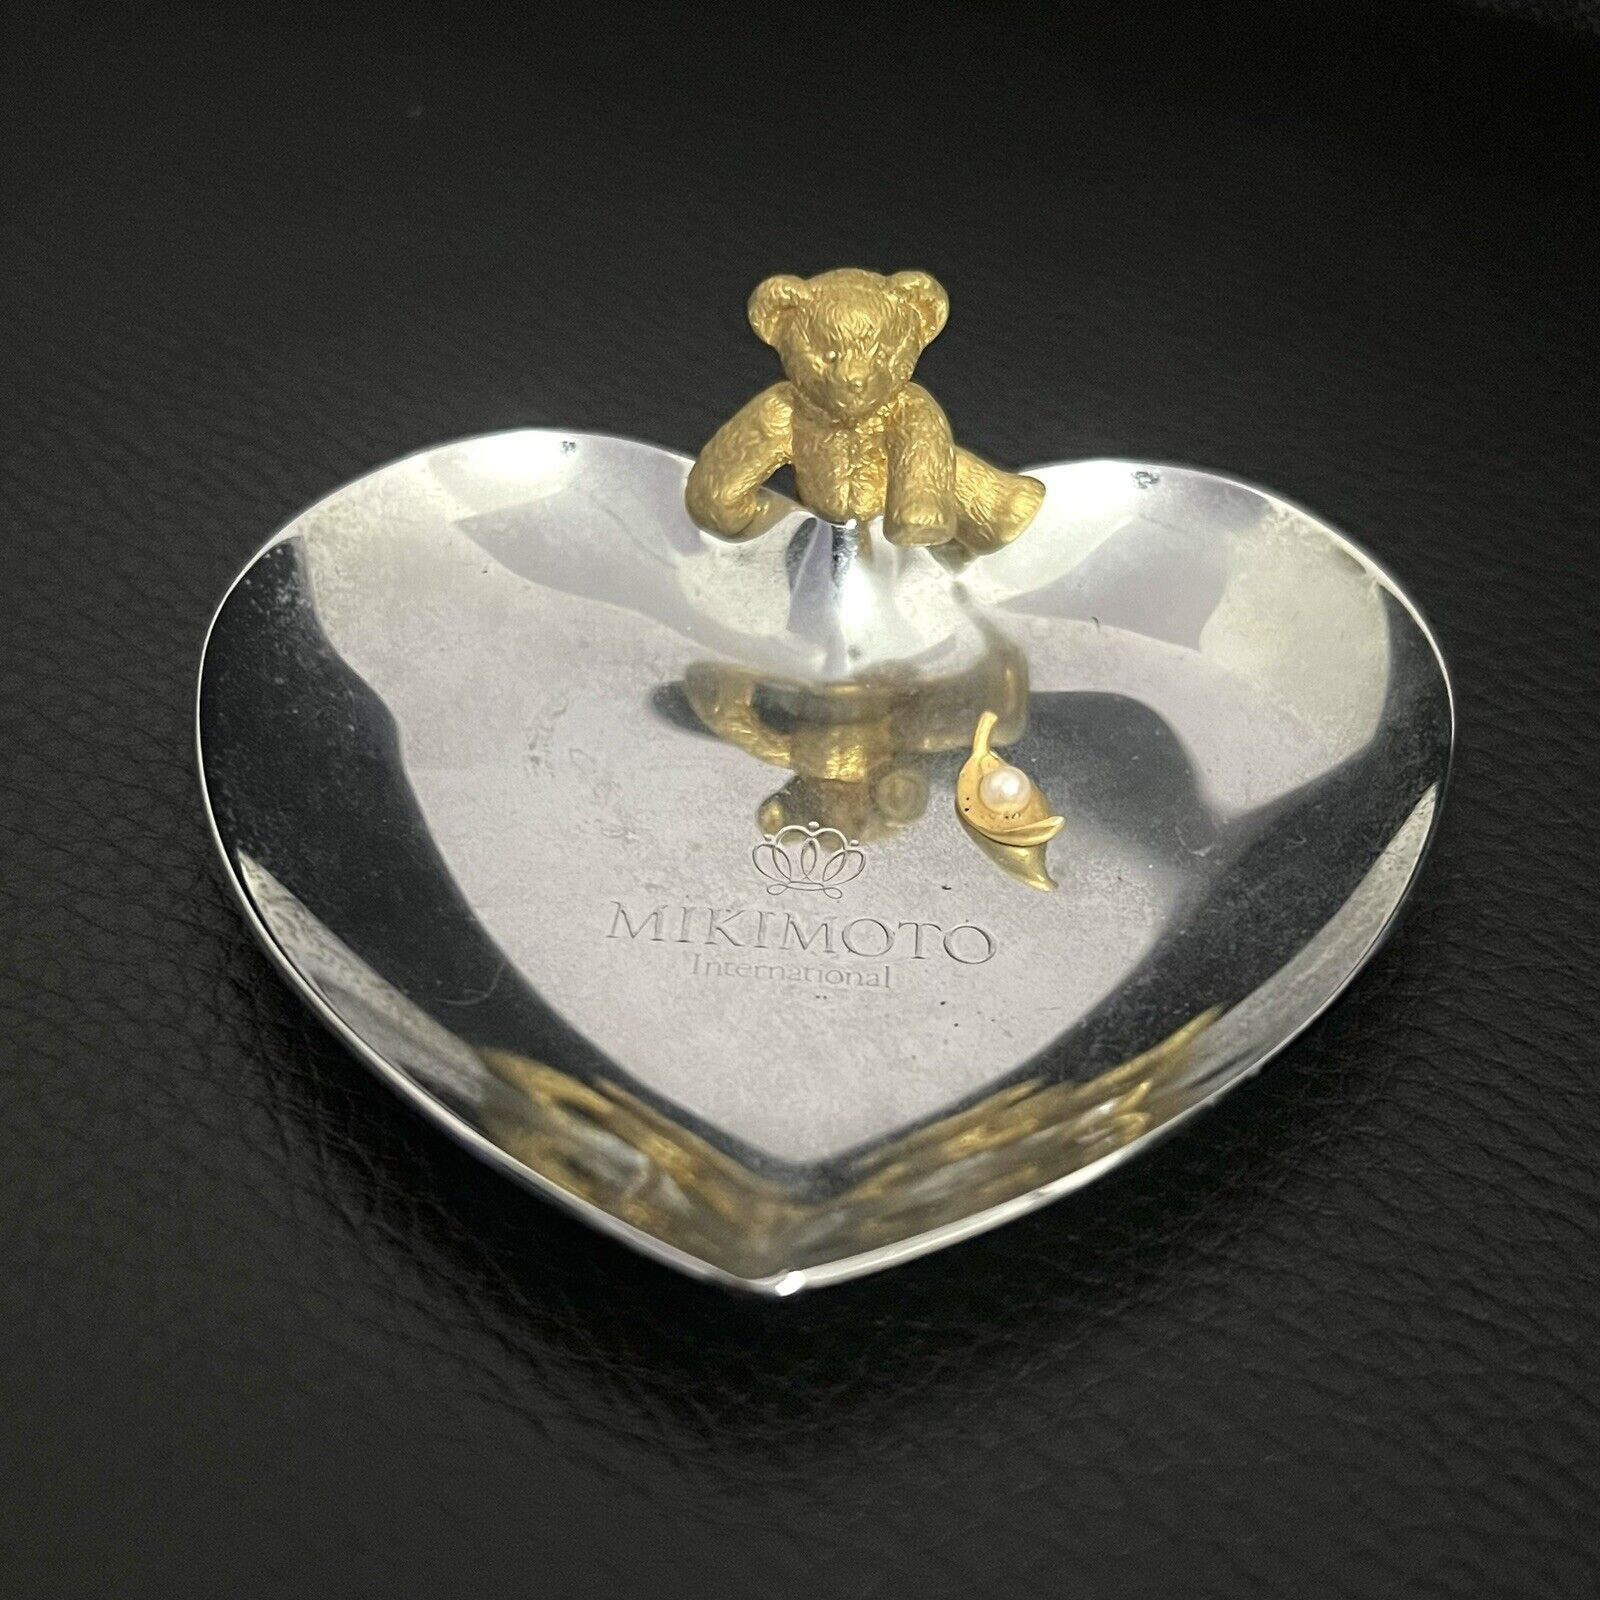 Mikimoto International Japan Pearl Silver Heart Tray Vintage Gold Bear Authentic